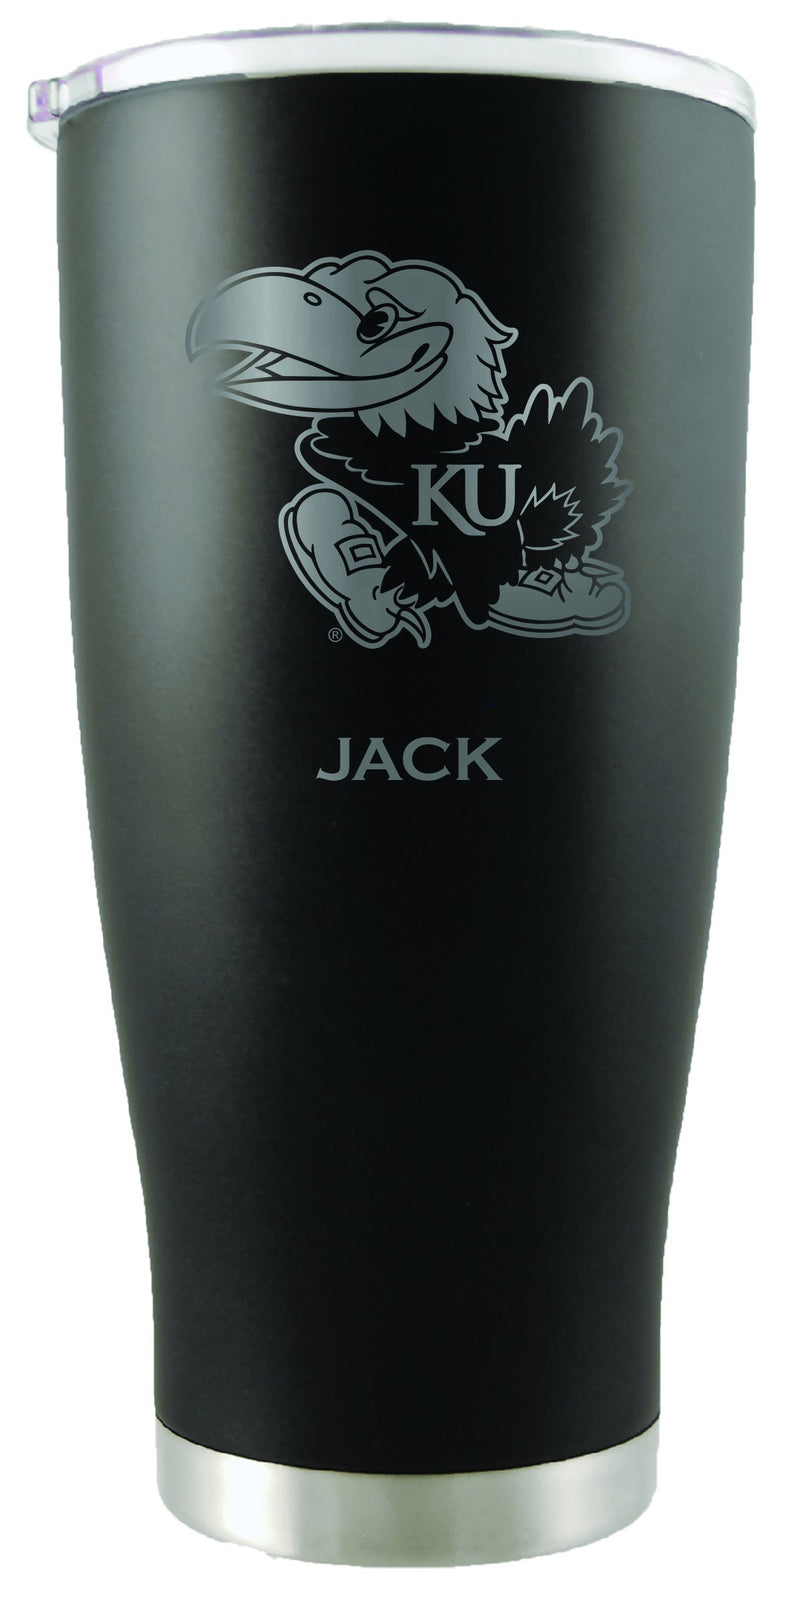 20oz Black Personalized Stainless Steel Tumbler | Kansas Jayhawks
COL, CurrentProduct, Drinkware_category_All, KAN, Kansas Jayhawks, Personalized_Personalized
The Memory Company